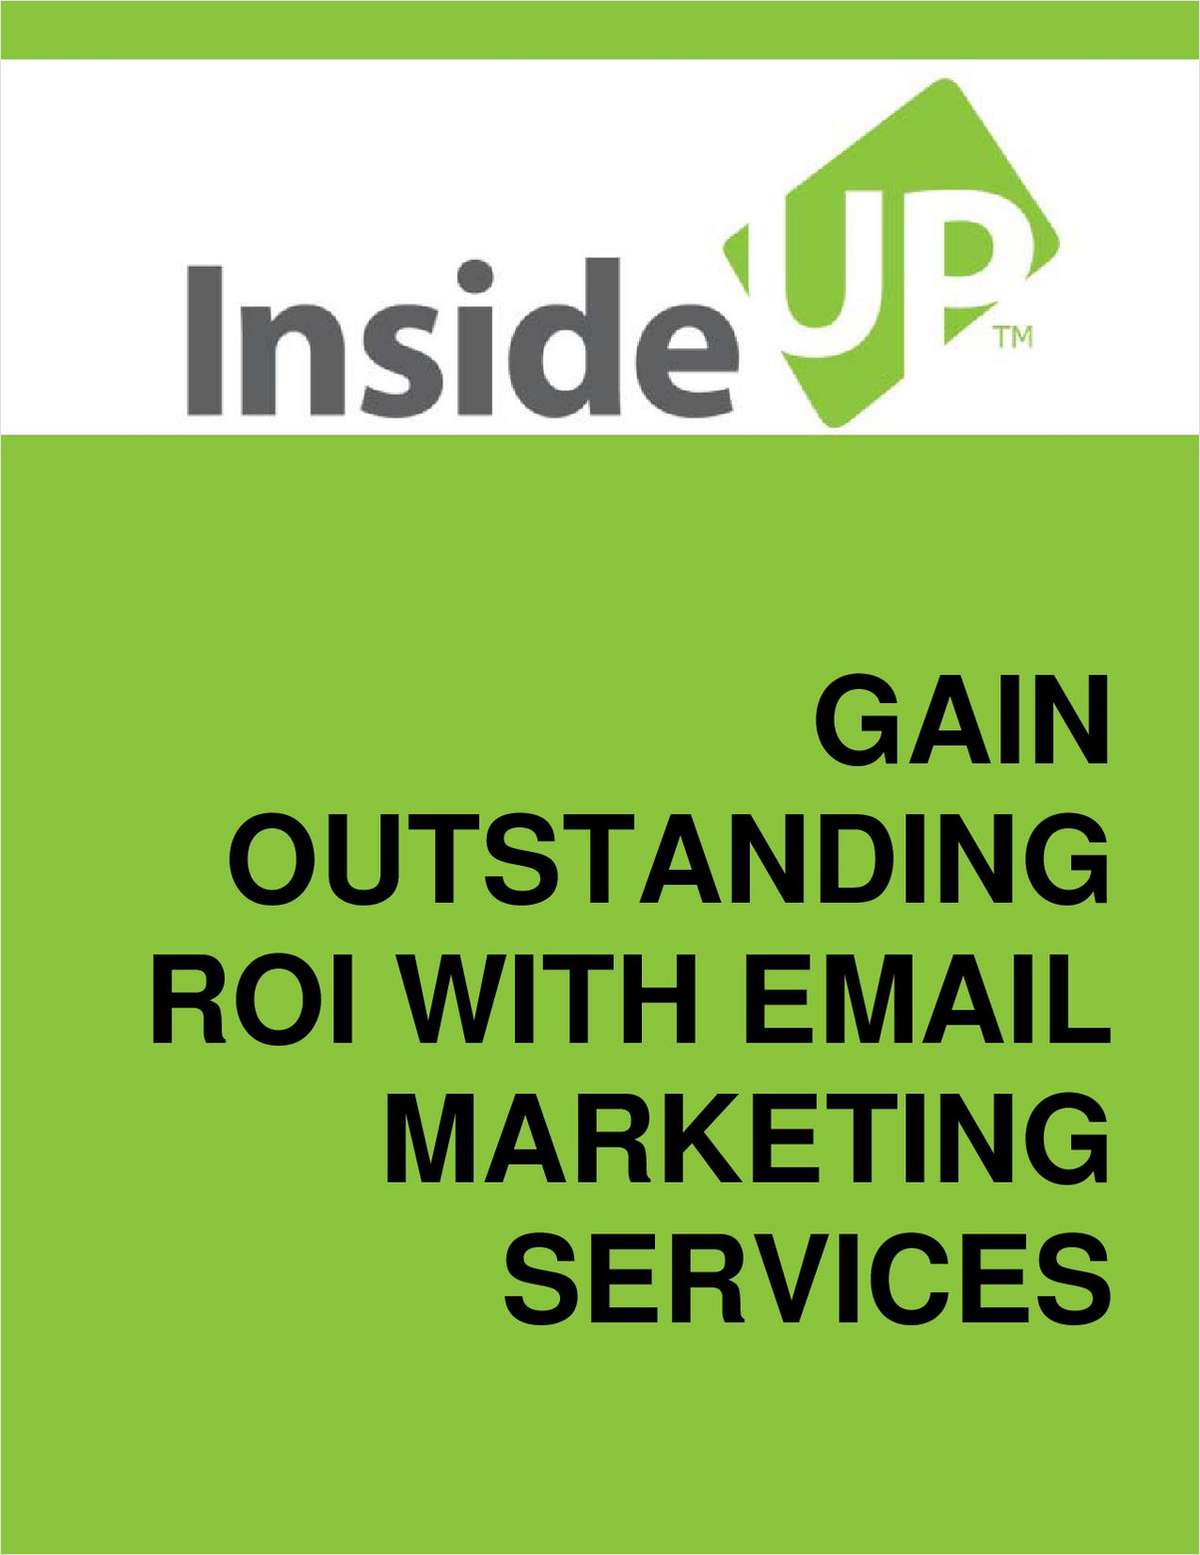 How to Effectively Use E-mail Marketing to Increase ROI